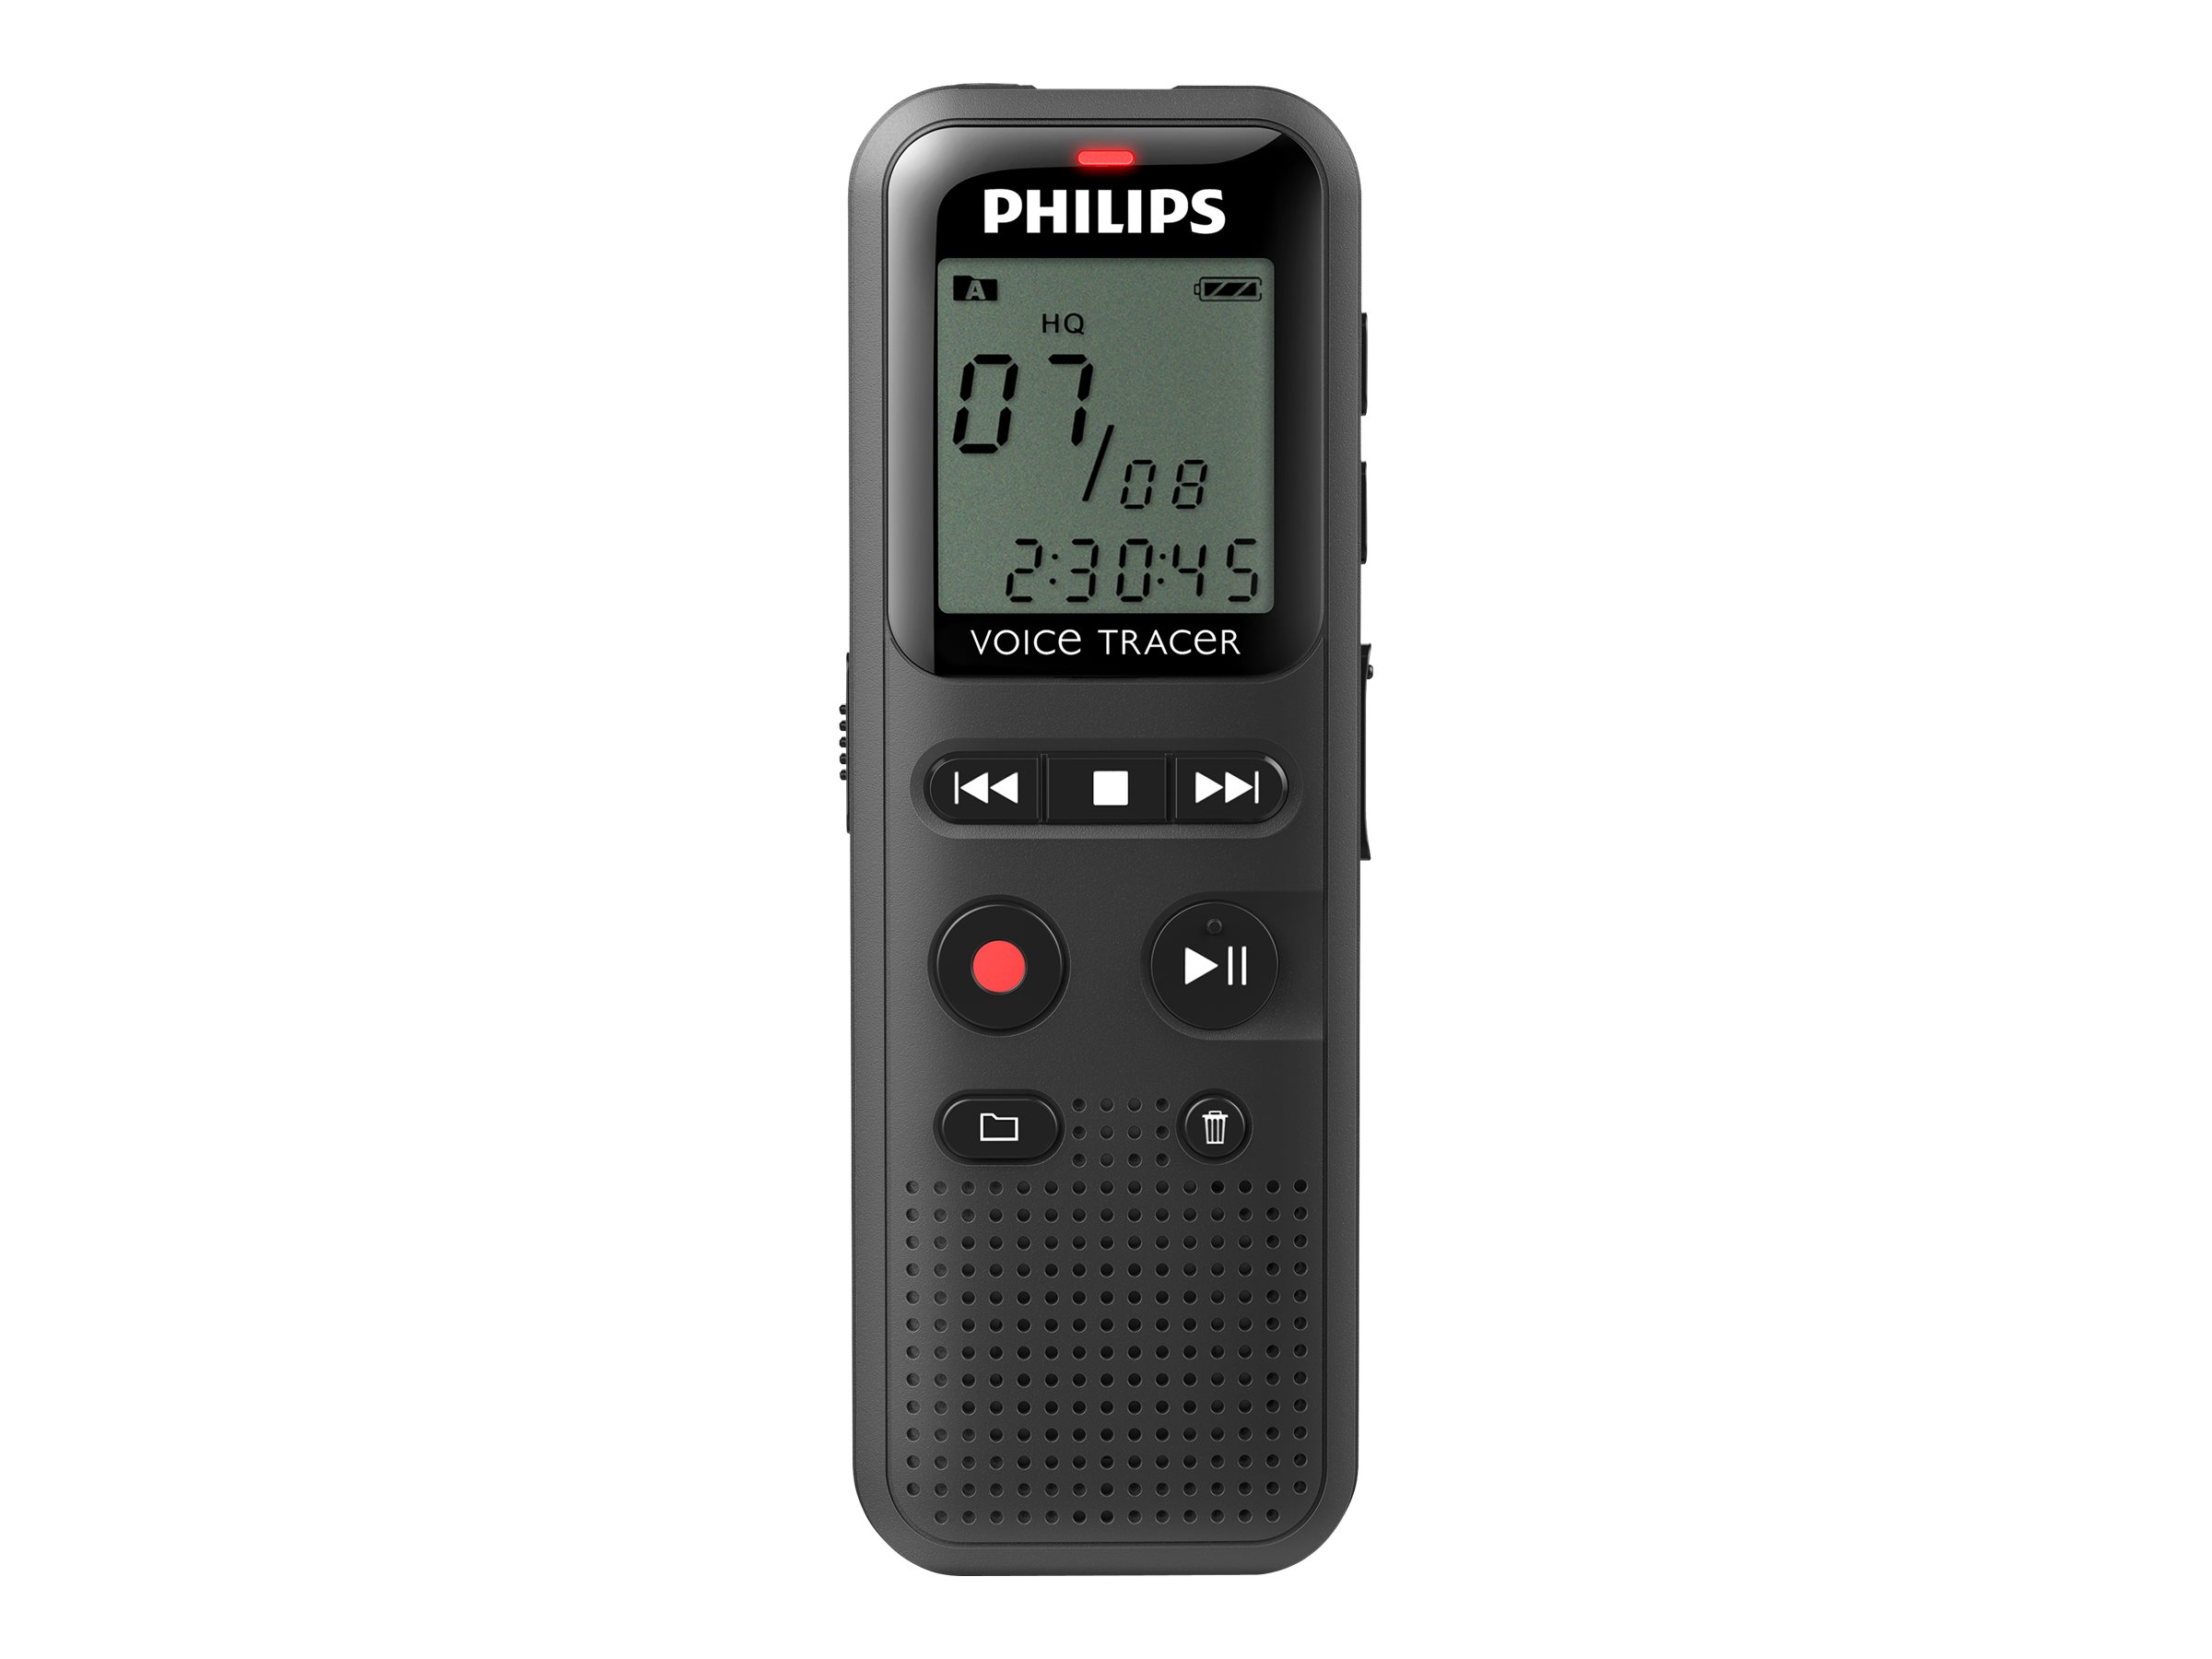 Philips Voice Tracer DVT1150 - Voice recorder - 4 GB - black - image 2 of 7